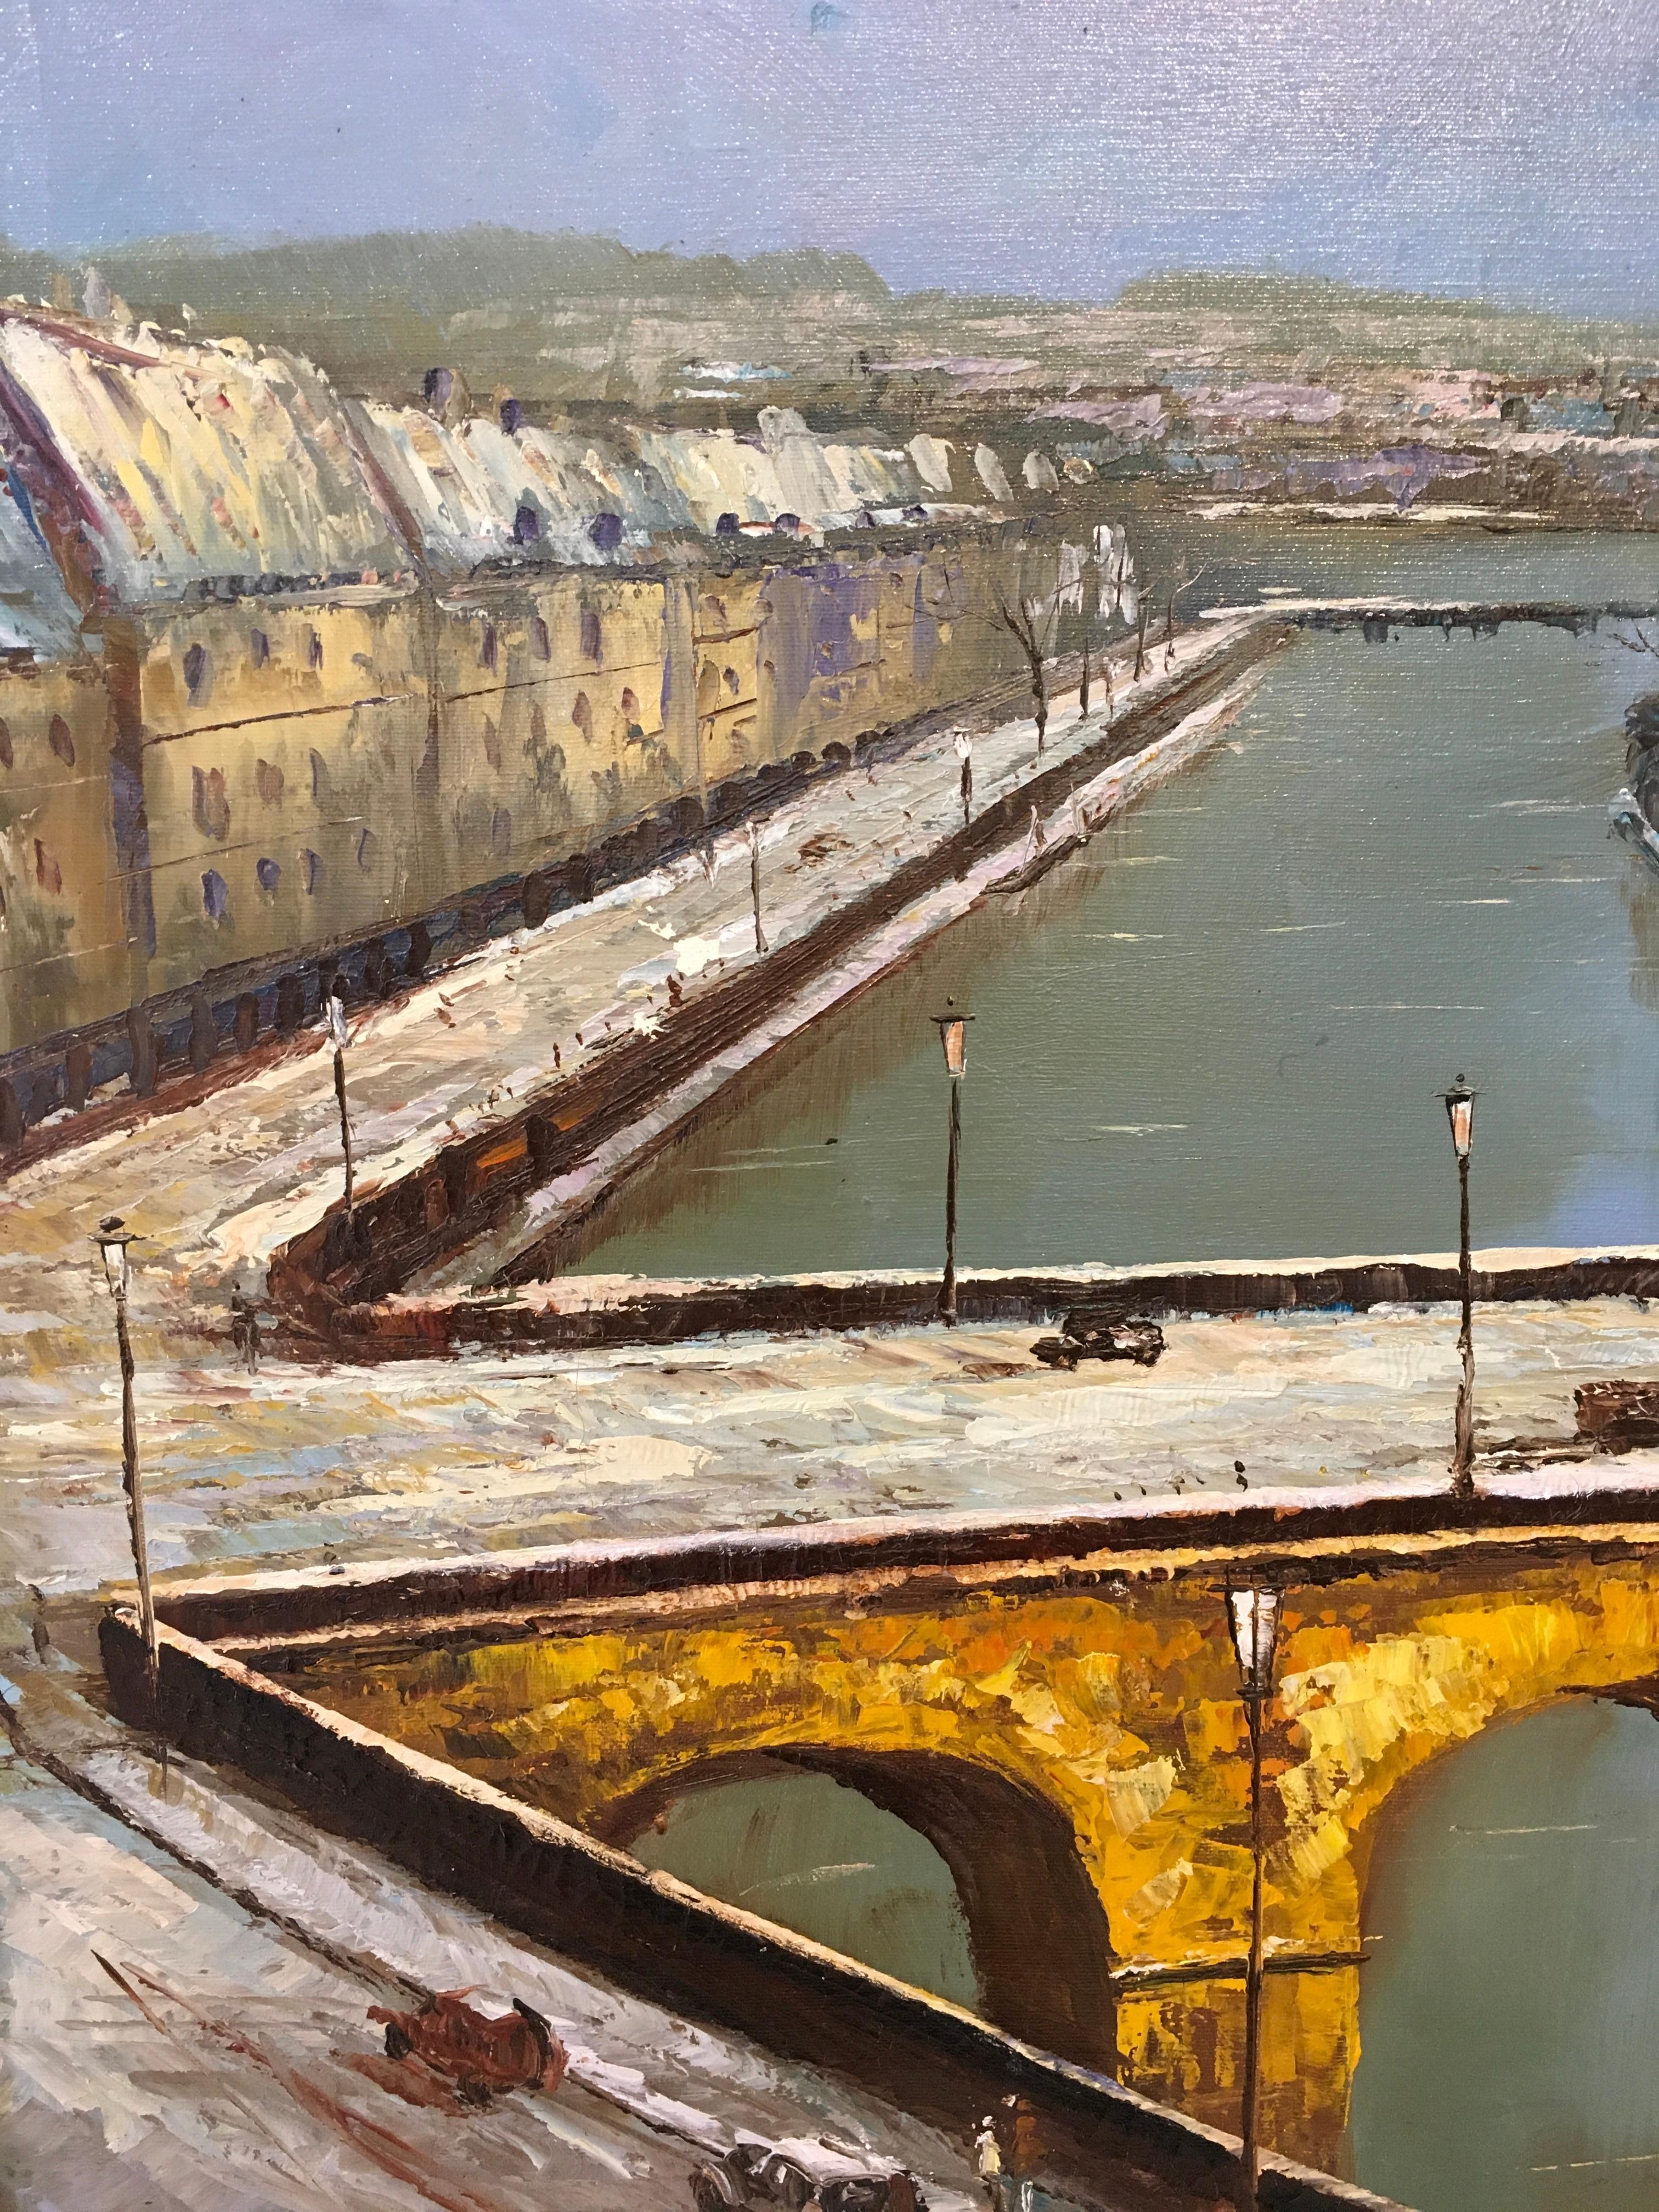 'French Impressionist Winter Scene of River Seine', by C. Tony, Oil on Canvas 4